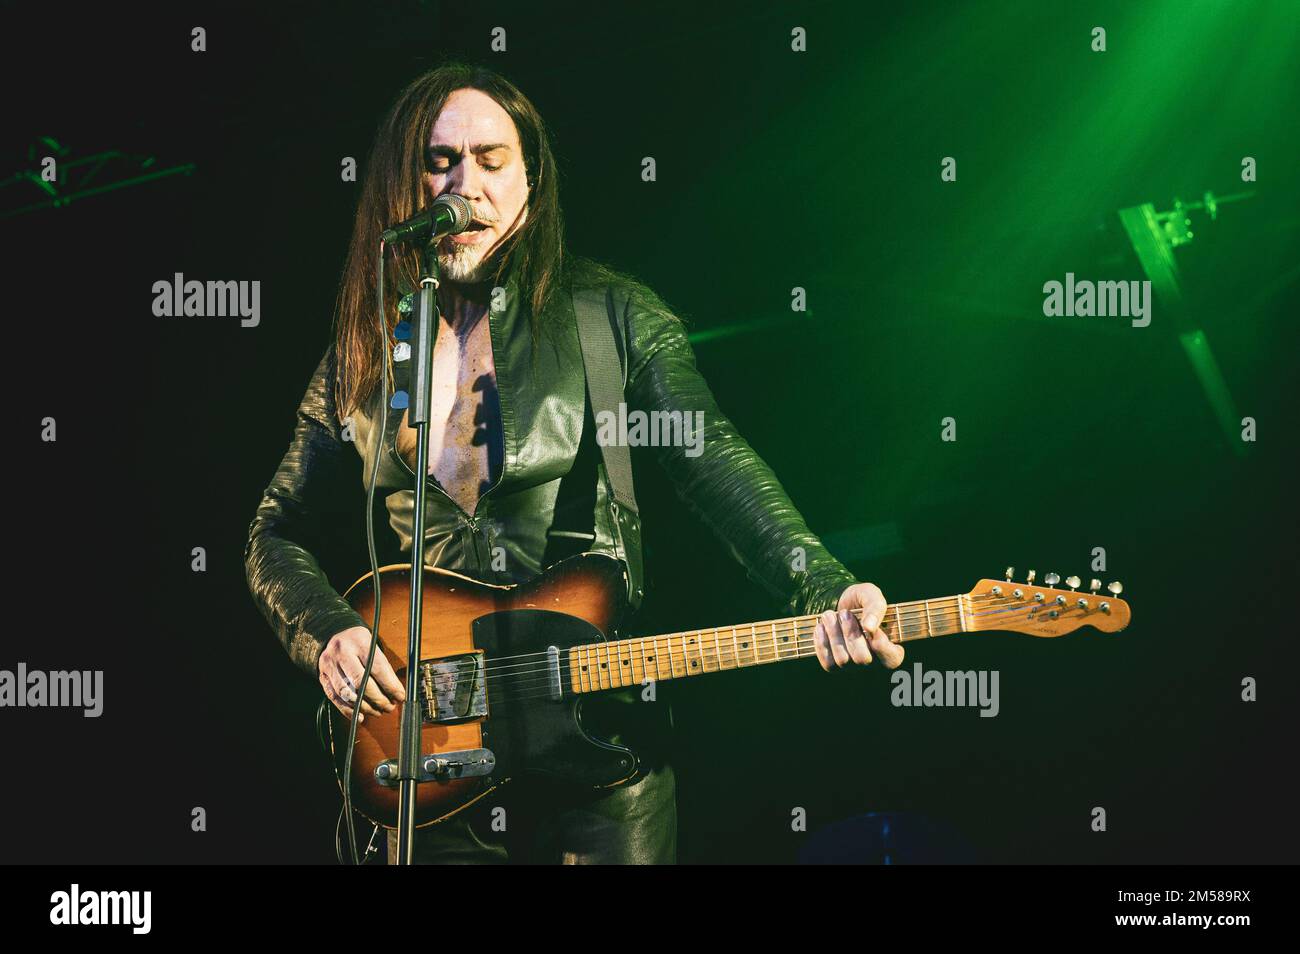 OGR, TORINO, ITALY: The Italian singer, songwriter and producer Manuel Agnelli performing live on stage for his “Ama Il Prossimo Tuo Come Te Stesso” tour concert in Torino at the Officine Grandi Riparazioni in front a sold out venue. Stock Photo